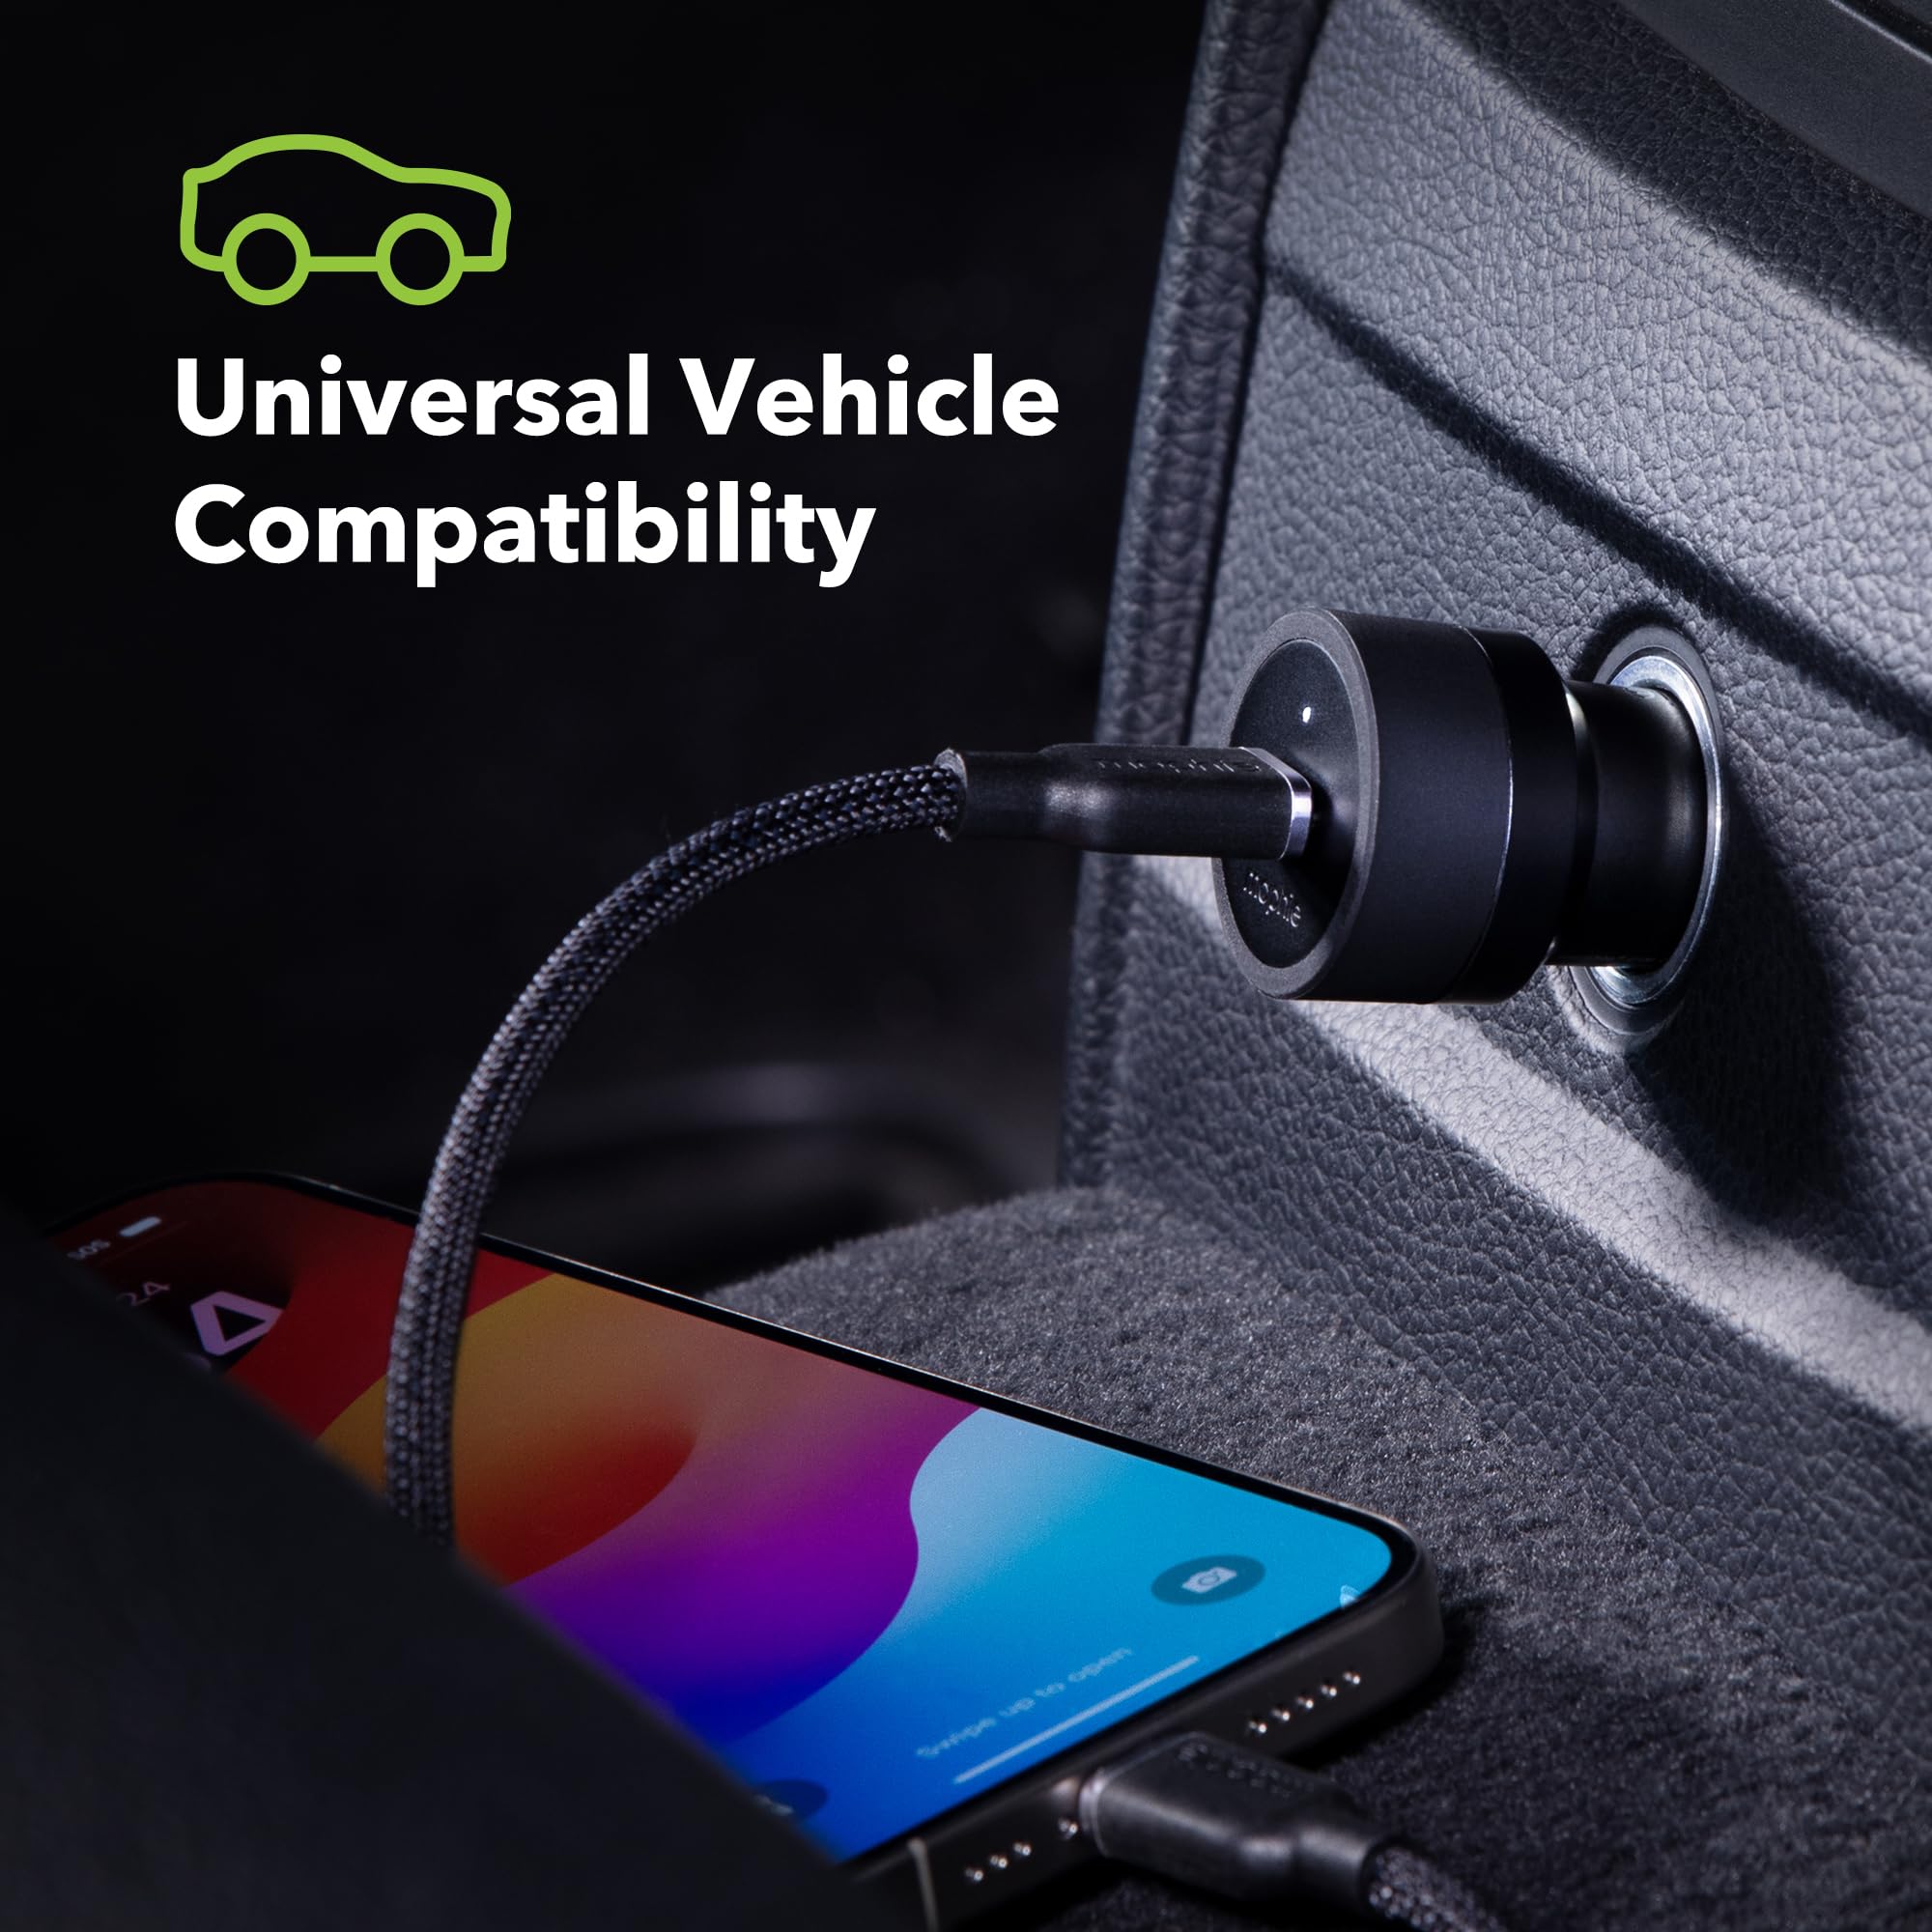 mophie 30W USB-C Car Charger - Eco-Friendly Fast Charging for Devices, LED Indicator, Universal AUX Compatibility